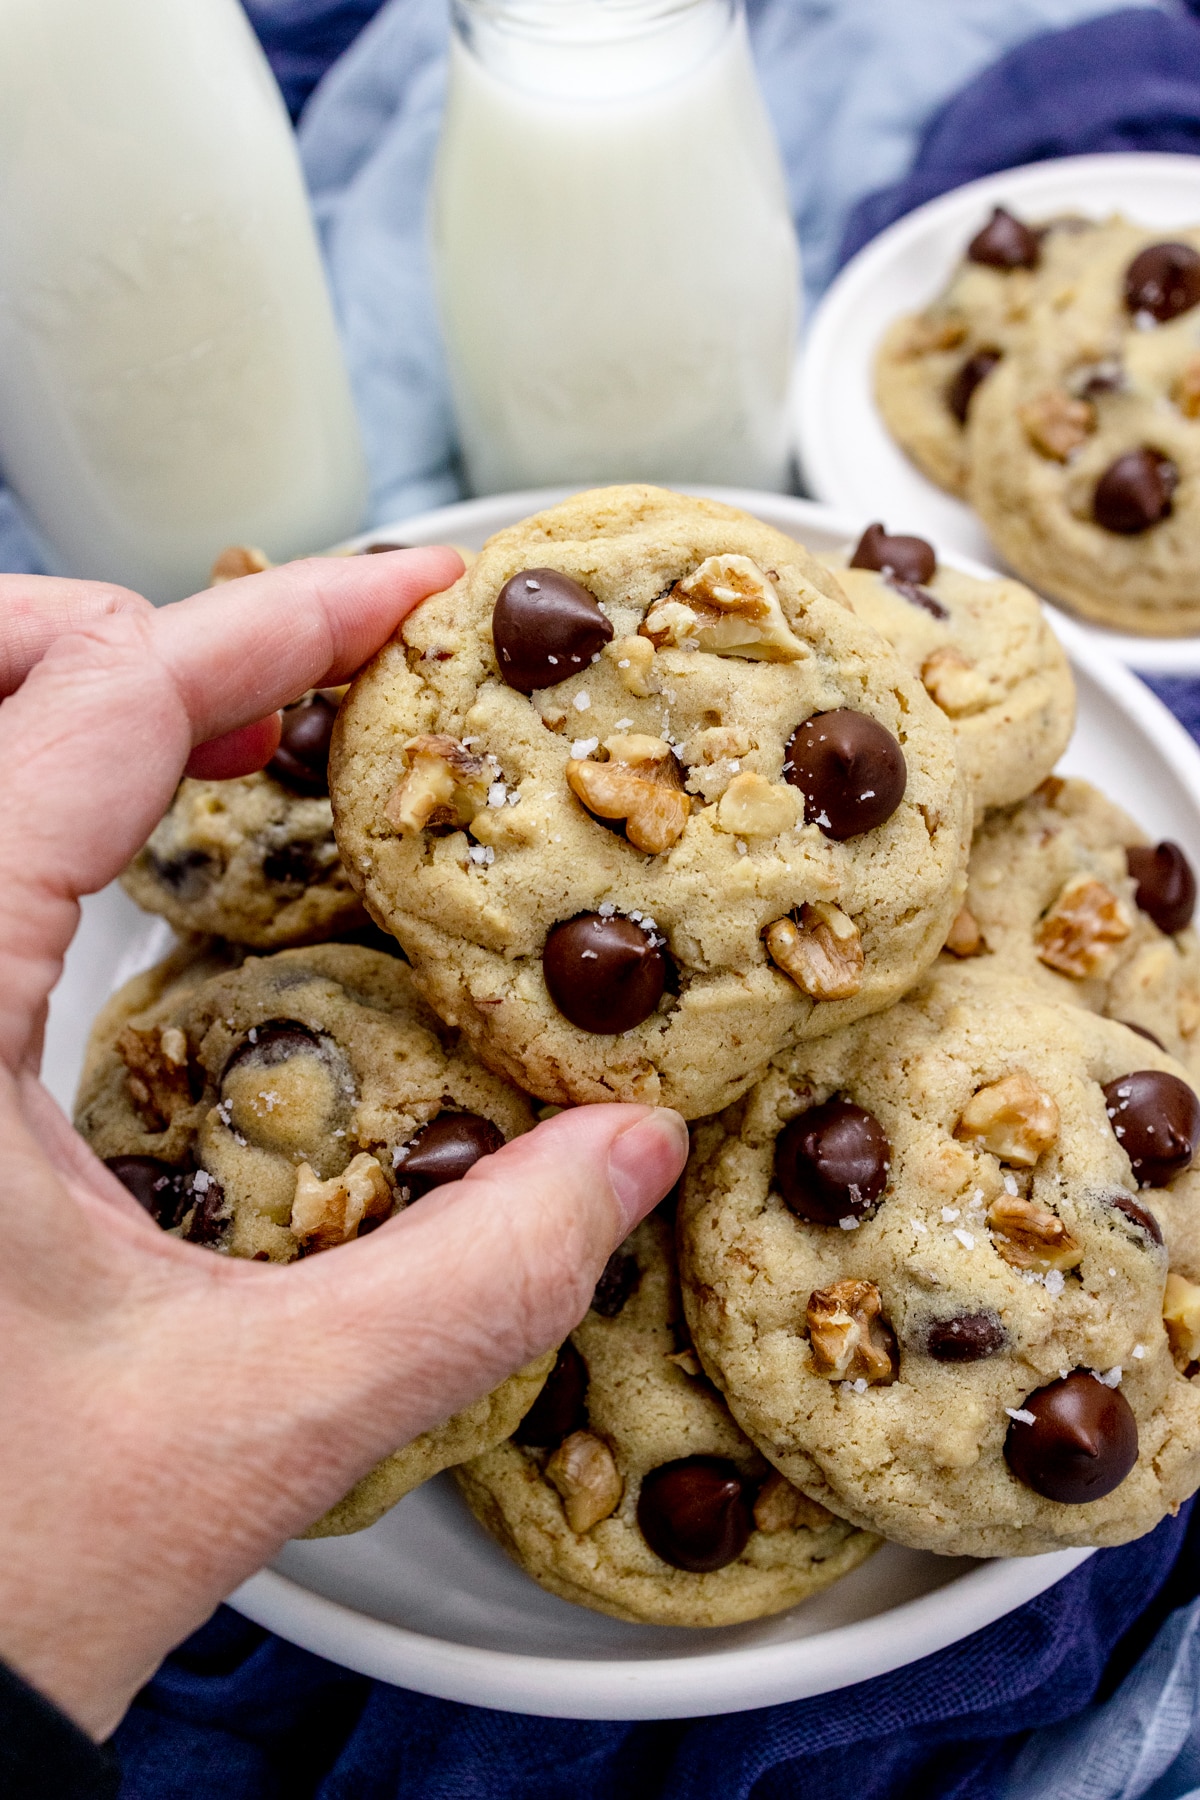 Close up view of a hand holding a Chocolate Chip Walnut Cookie over a white plate with more cookies on it and glasses of milk beside it.